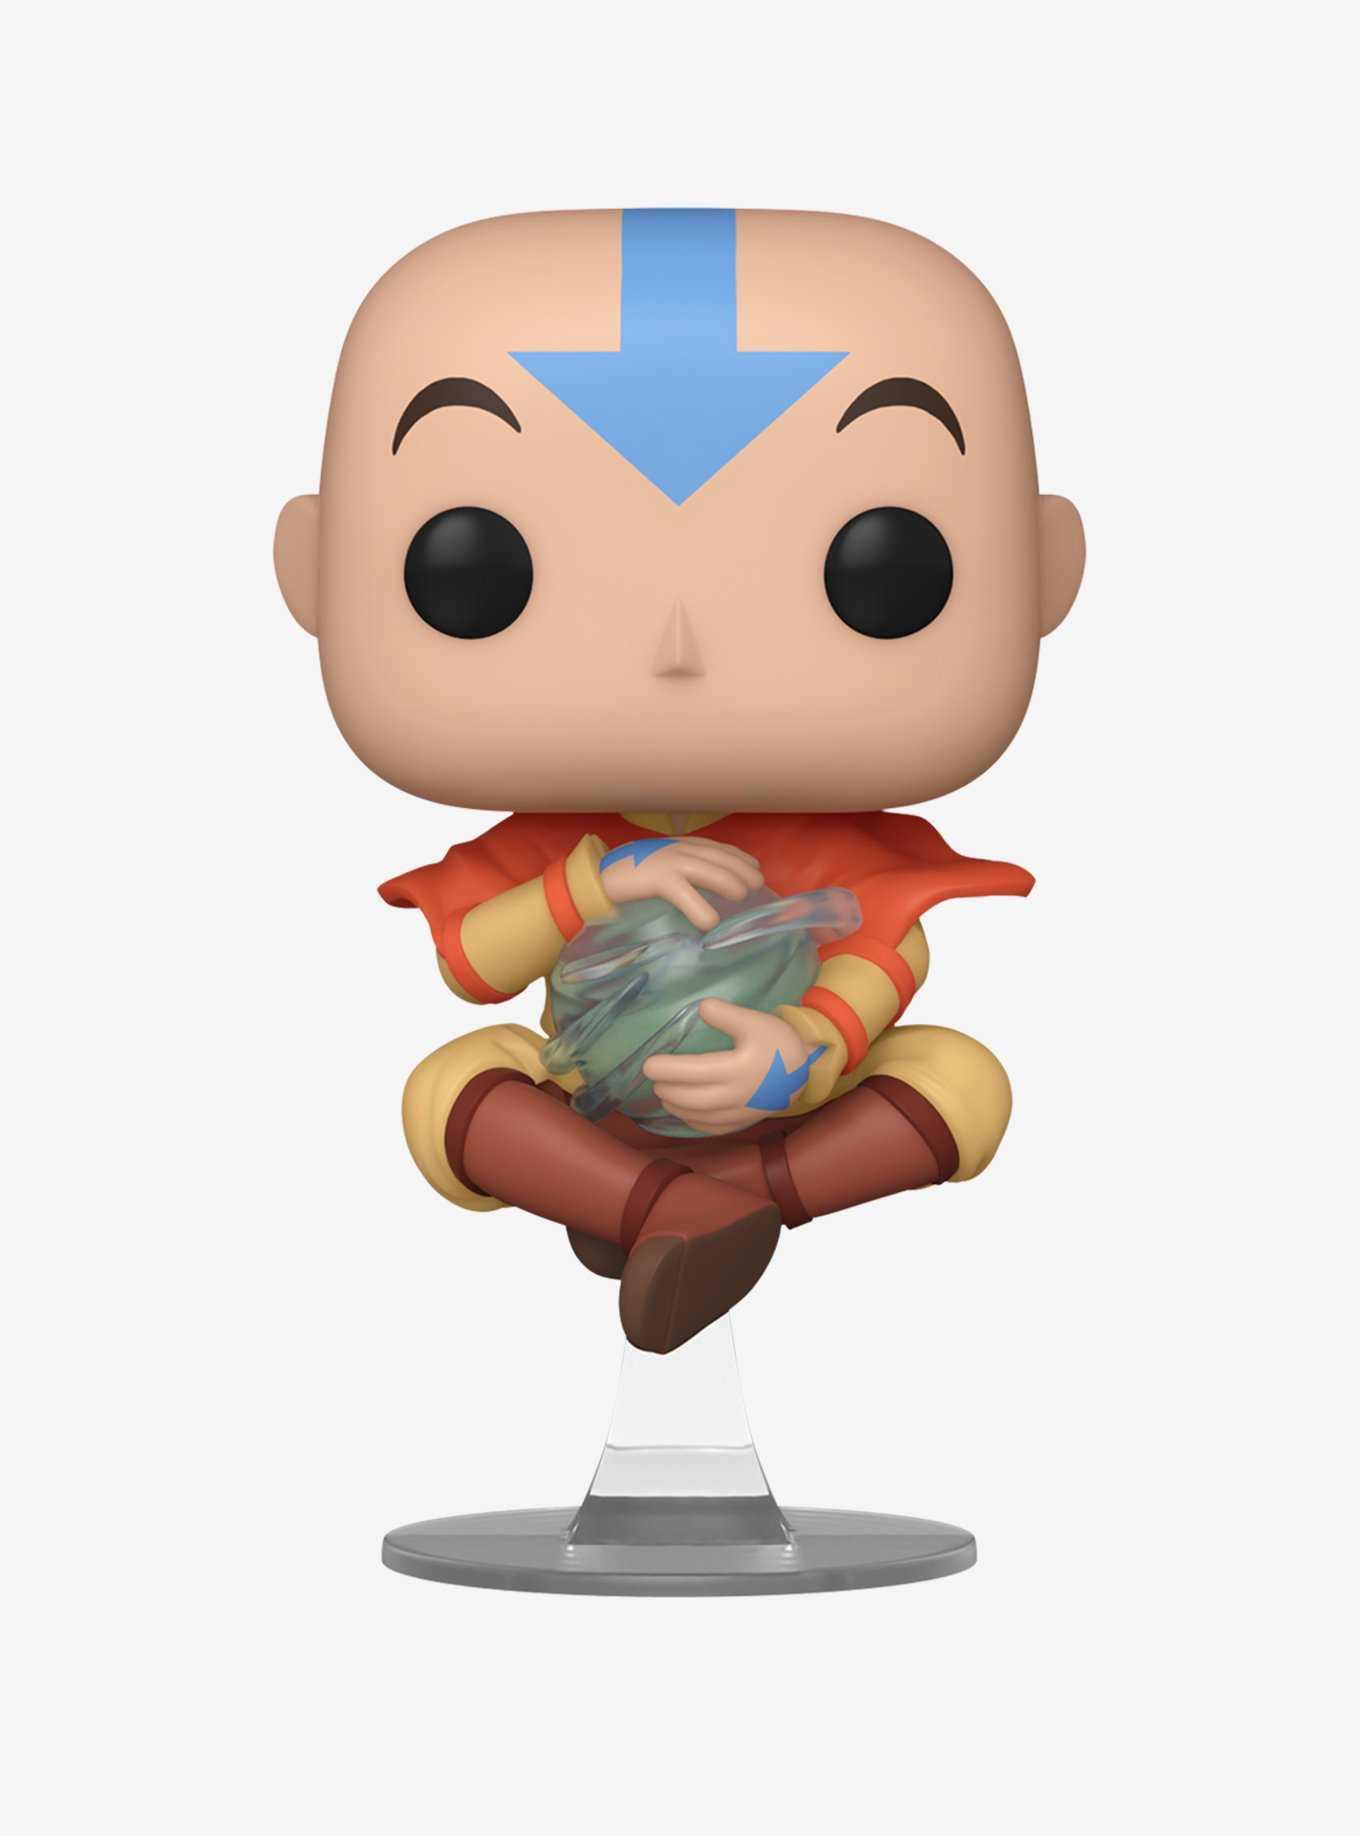 The Quenchiest Sticker  Avatar, Avatar the last airbender art, Anime  stickers